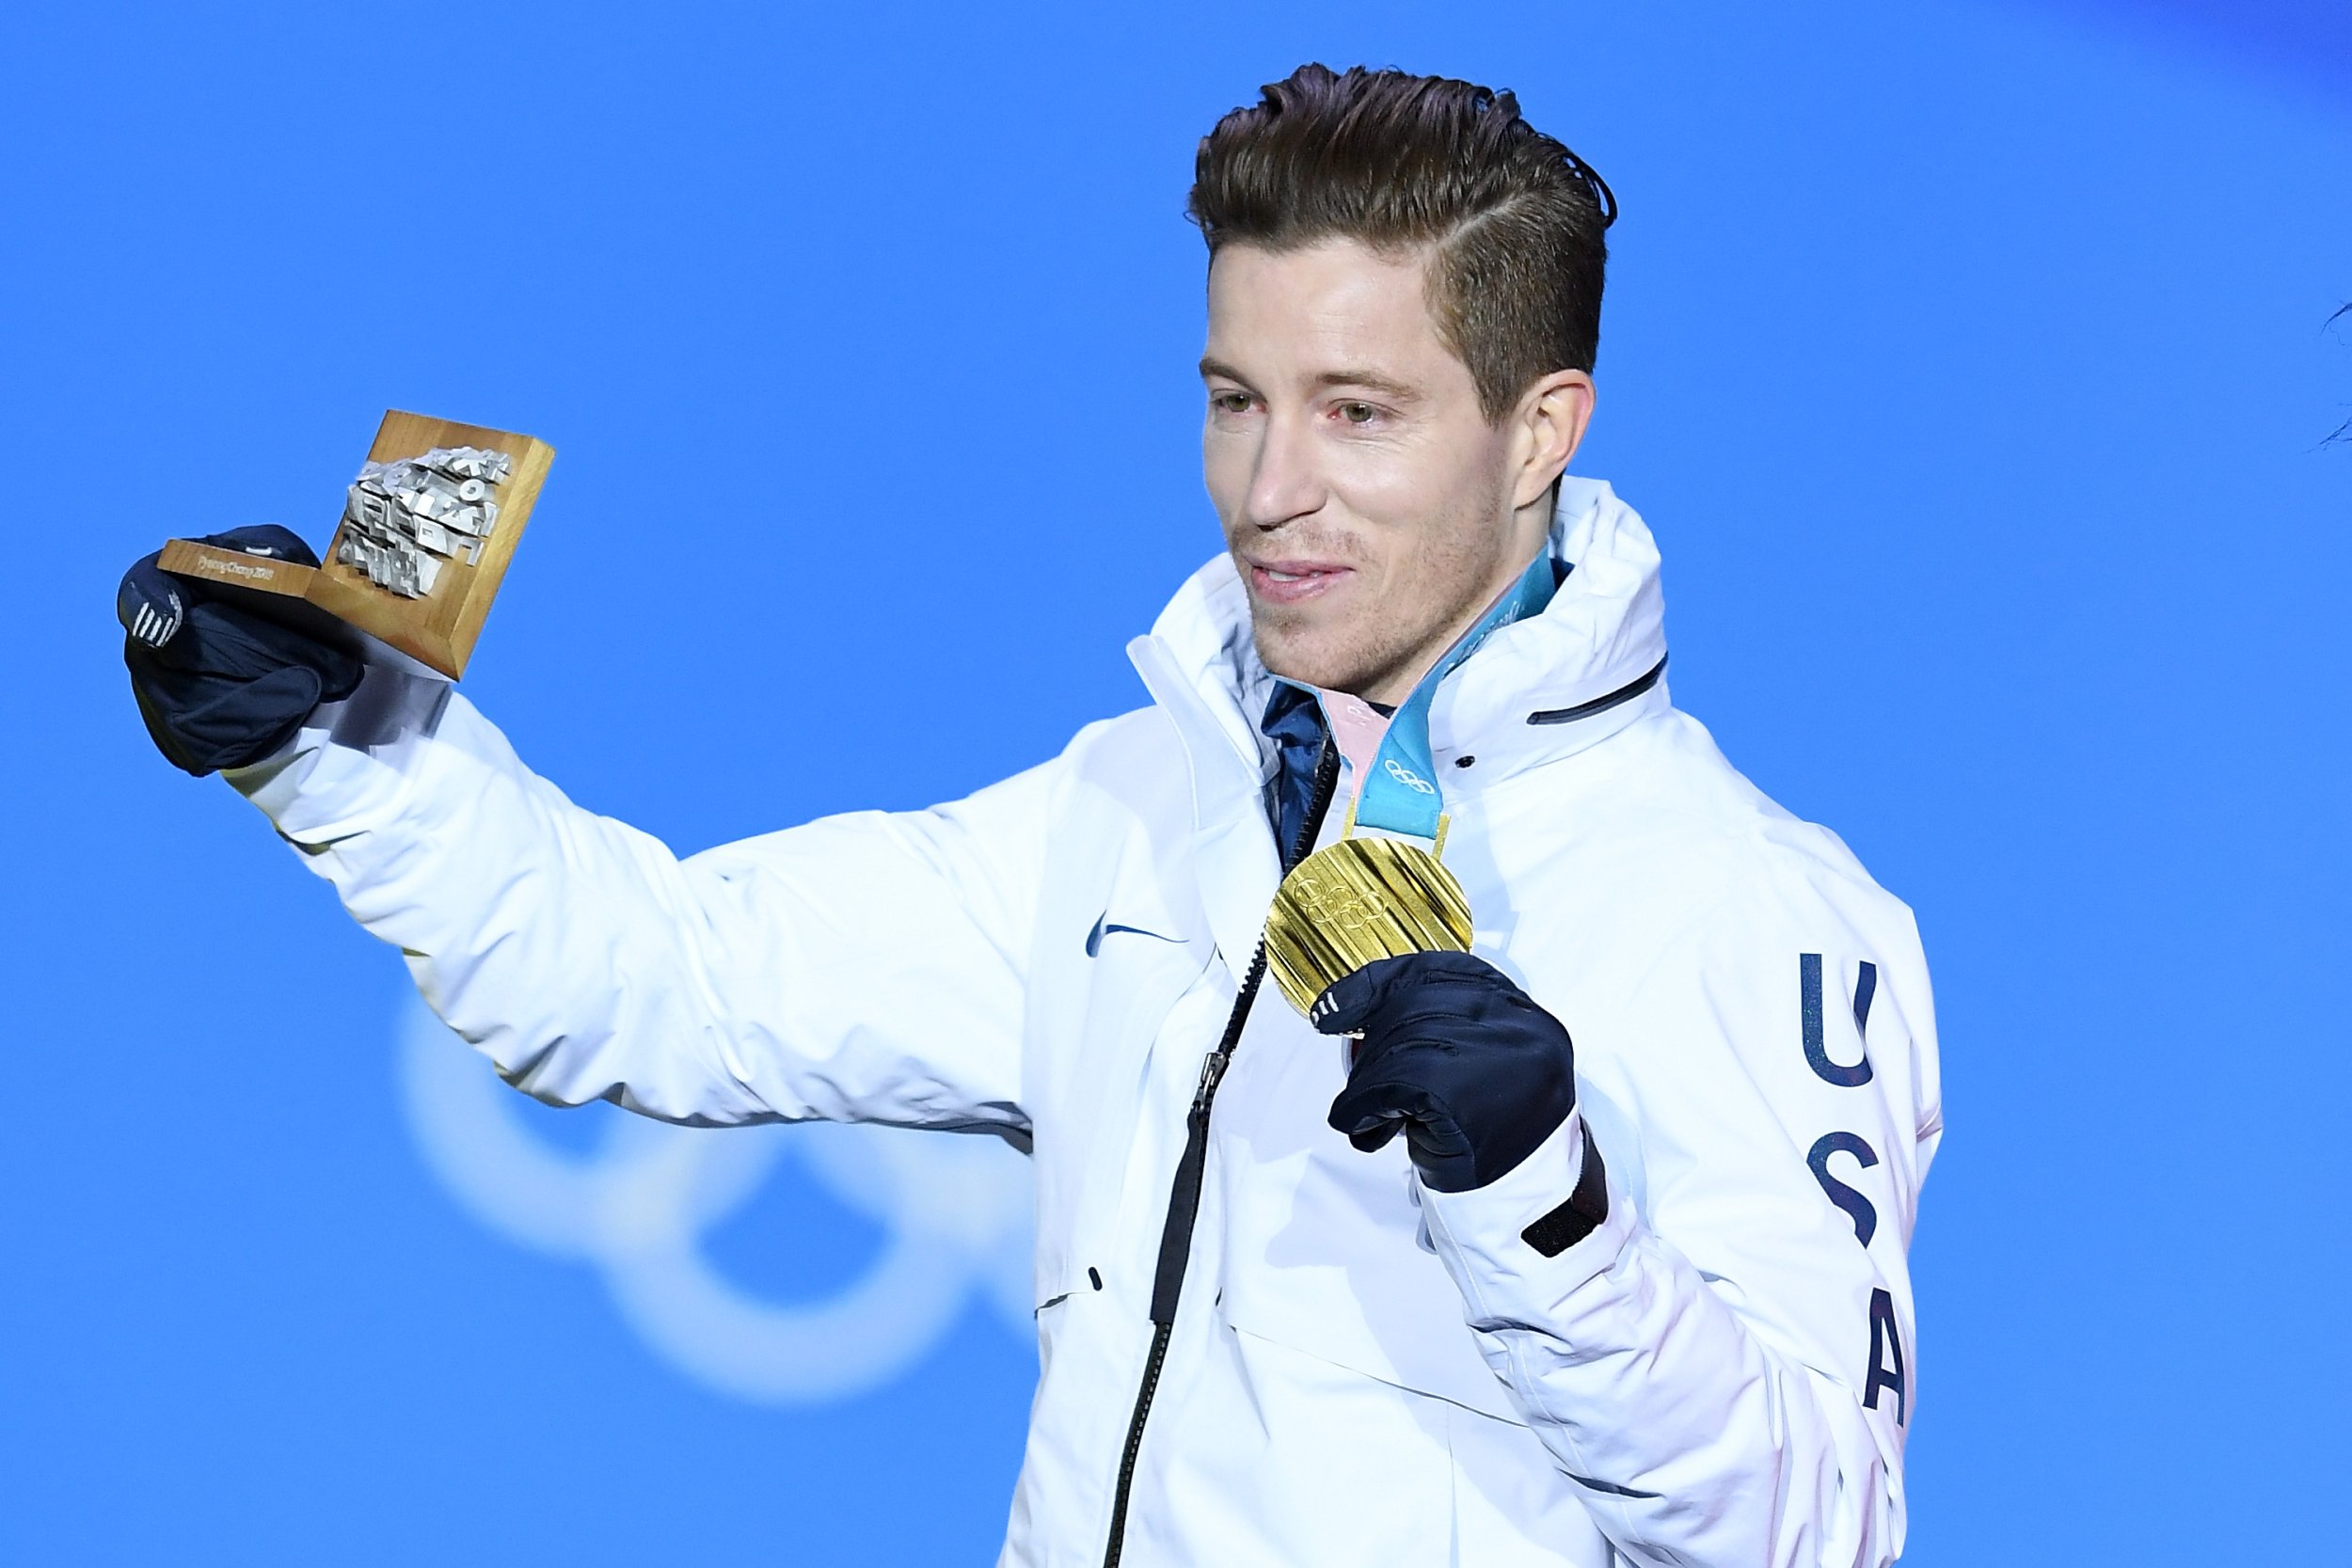 Shaun White embraces retirement, seeks to find his new place